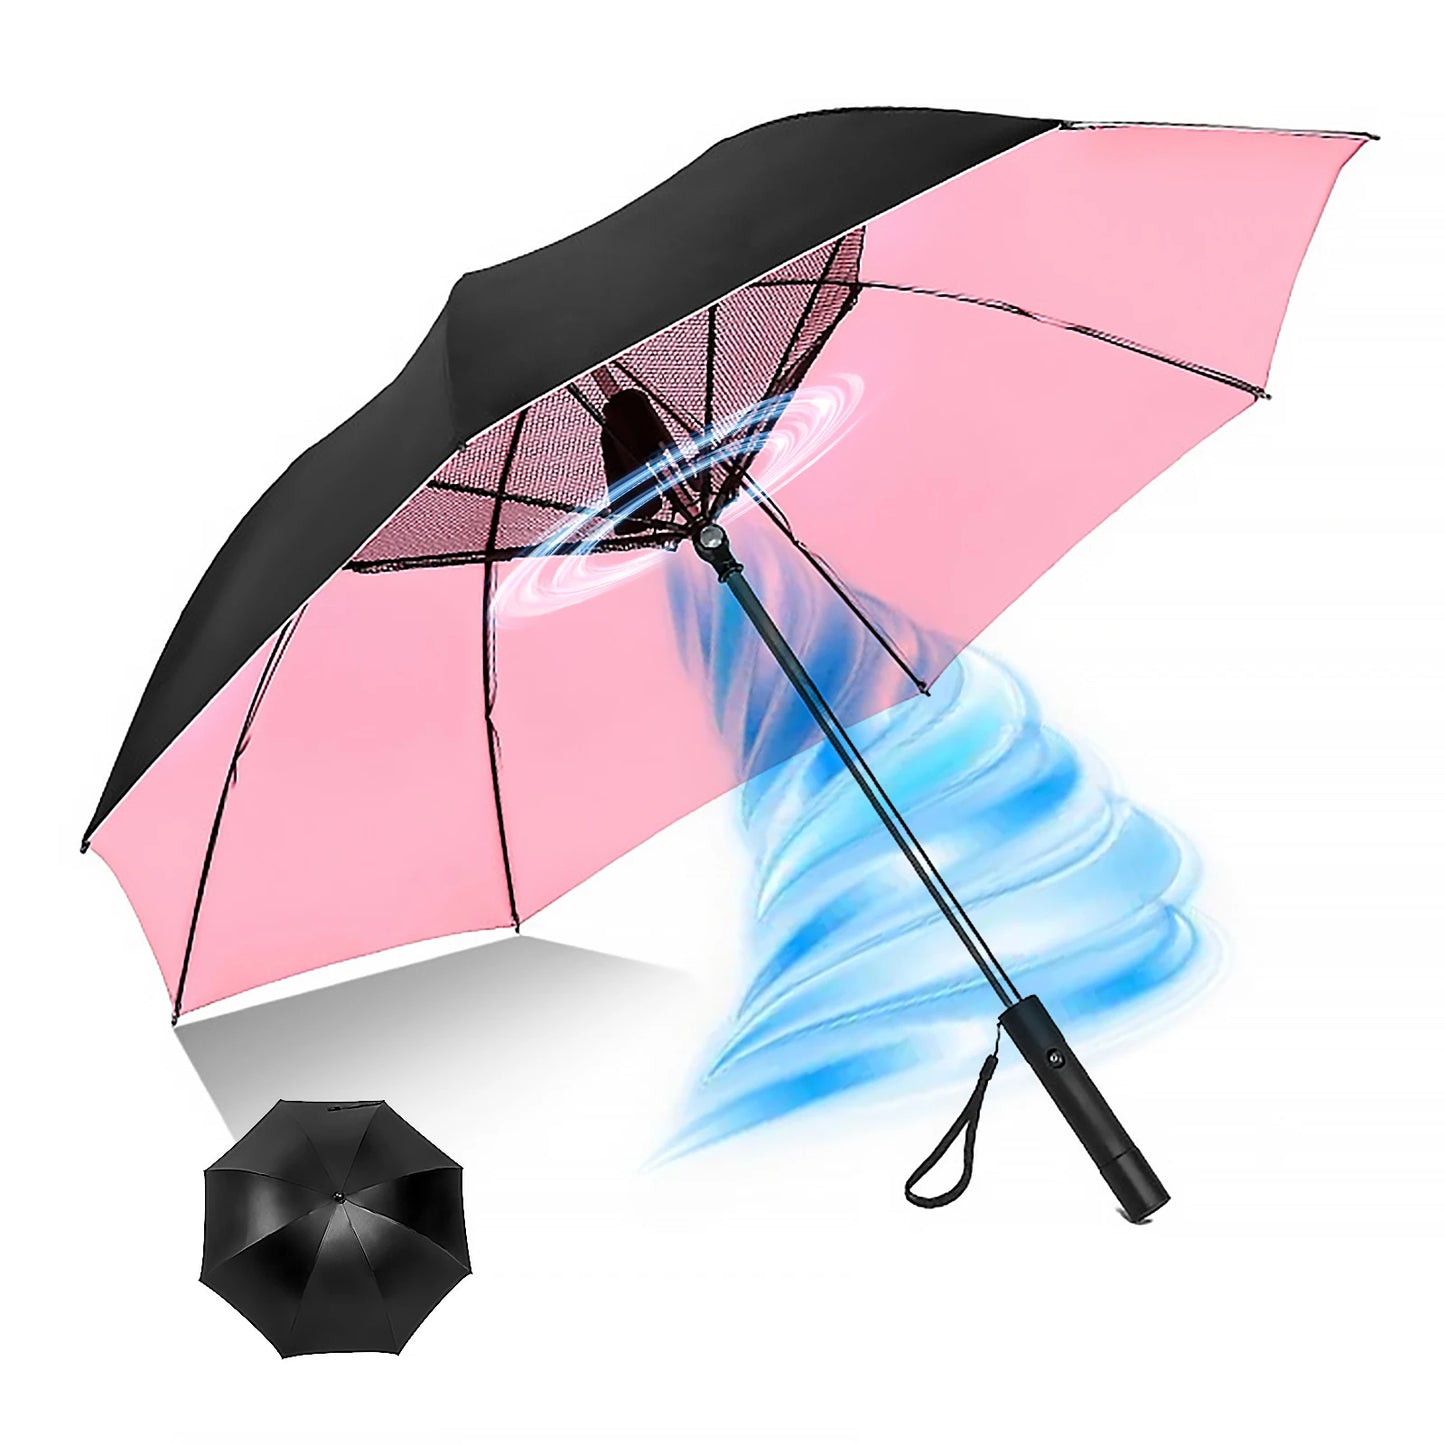 Portable Umbrella with Fan, UV-blocking, Wind-Resistant Design, USB-Rechargeable Battery